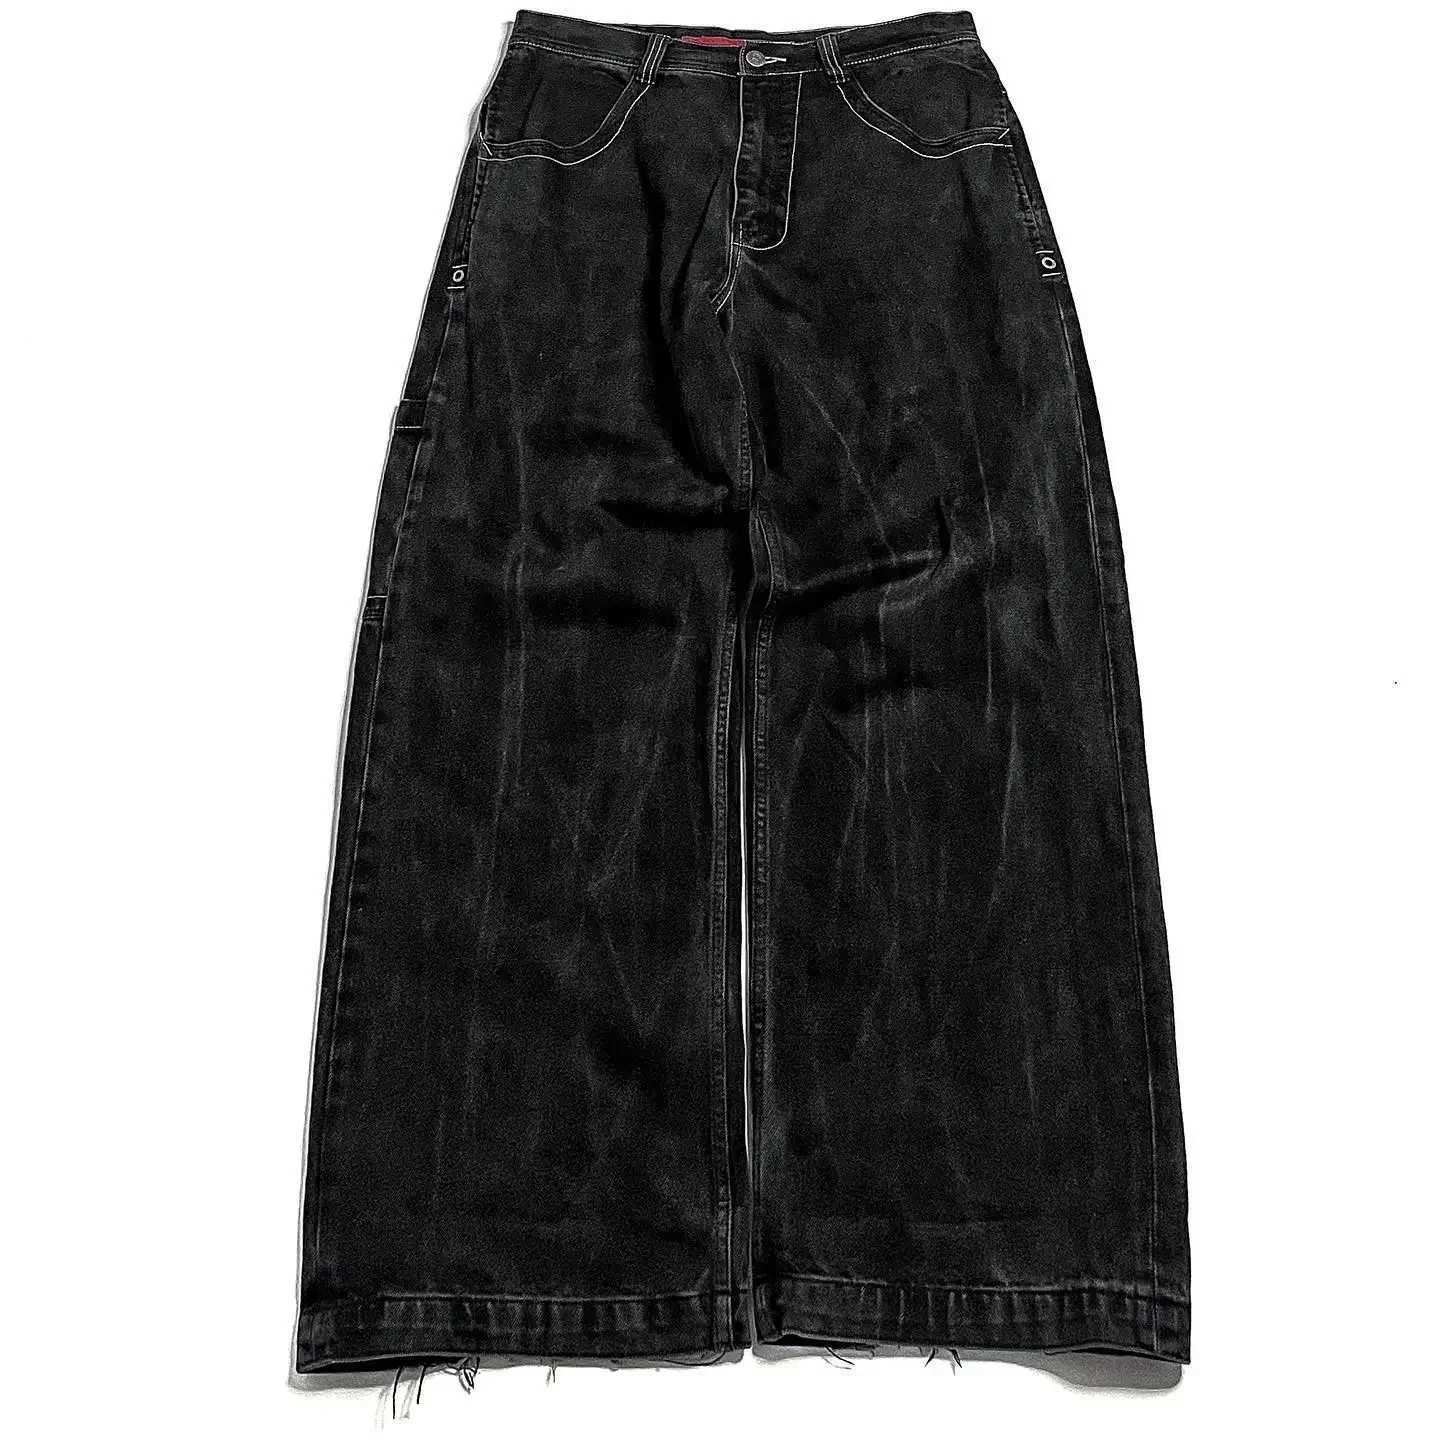 Herren Jeans Y2K American Retro Ancient Style Jeans Harajuku Hip Hop Totenkopf bestickt Loose Fit Jeans Gothic High Waist Wide Pants WomensL2403